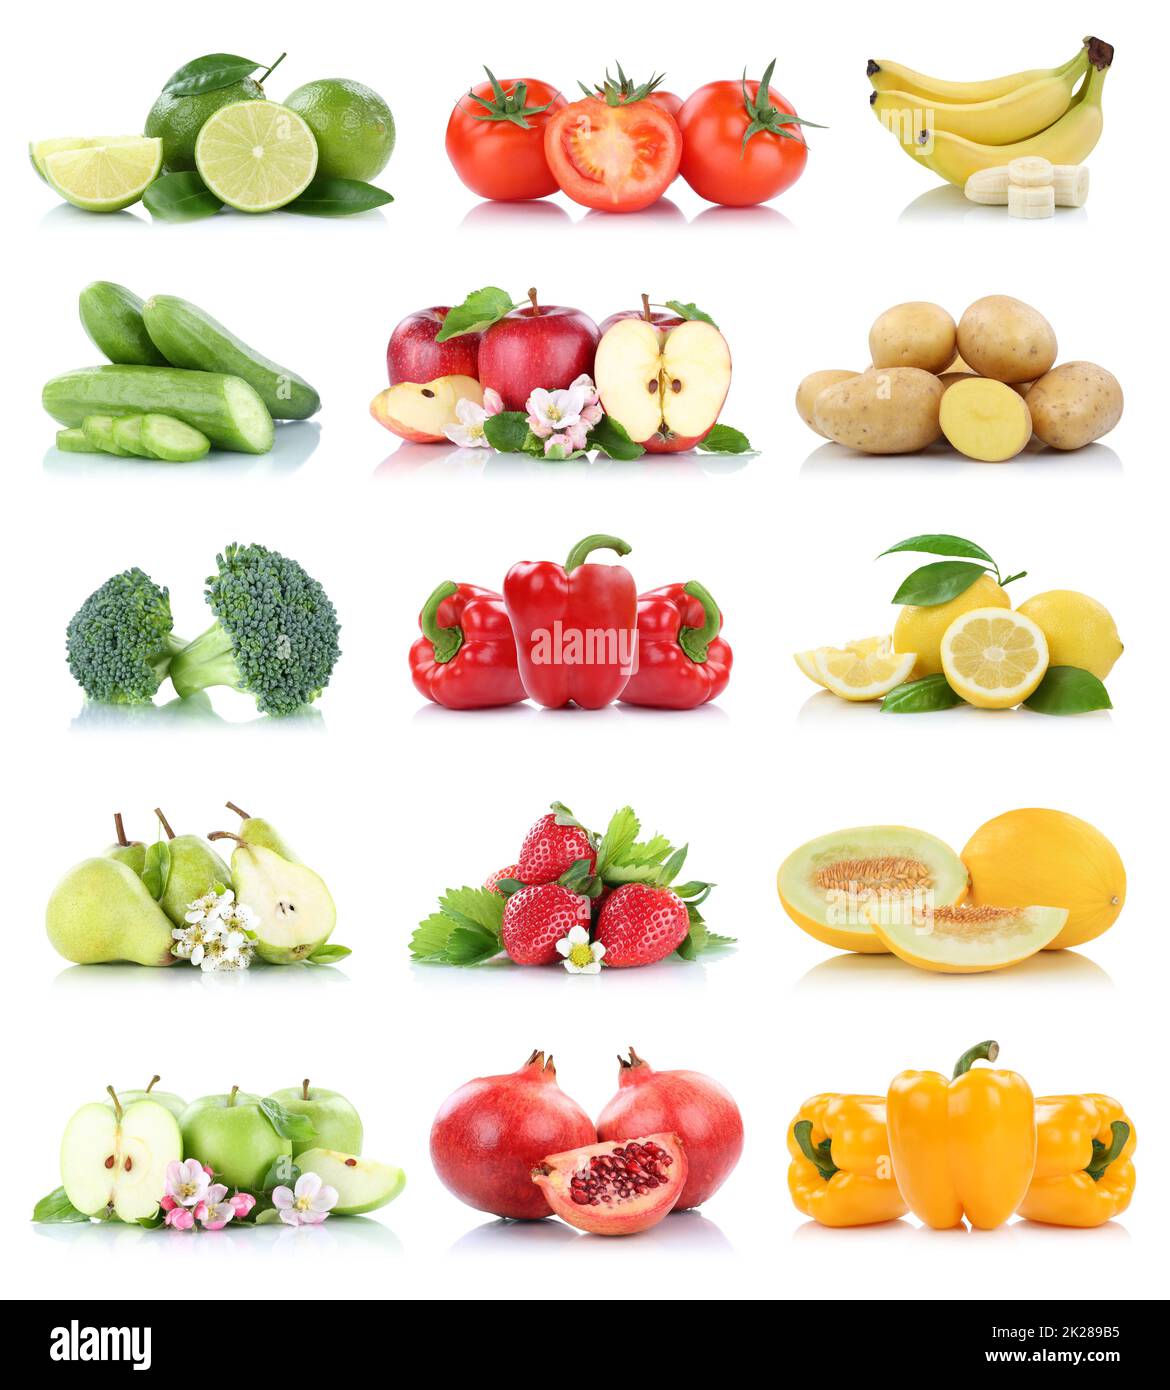 Fruits vegetables collection isolated apple apples bell pepper tomatoes banana colors fresh fruit Stock Photo